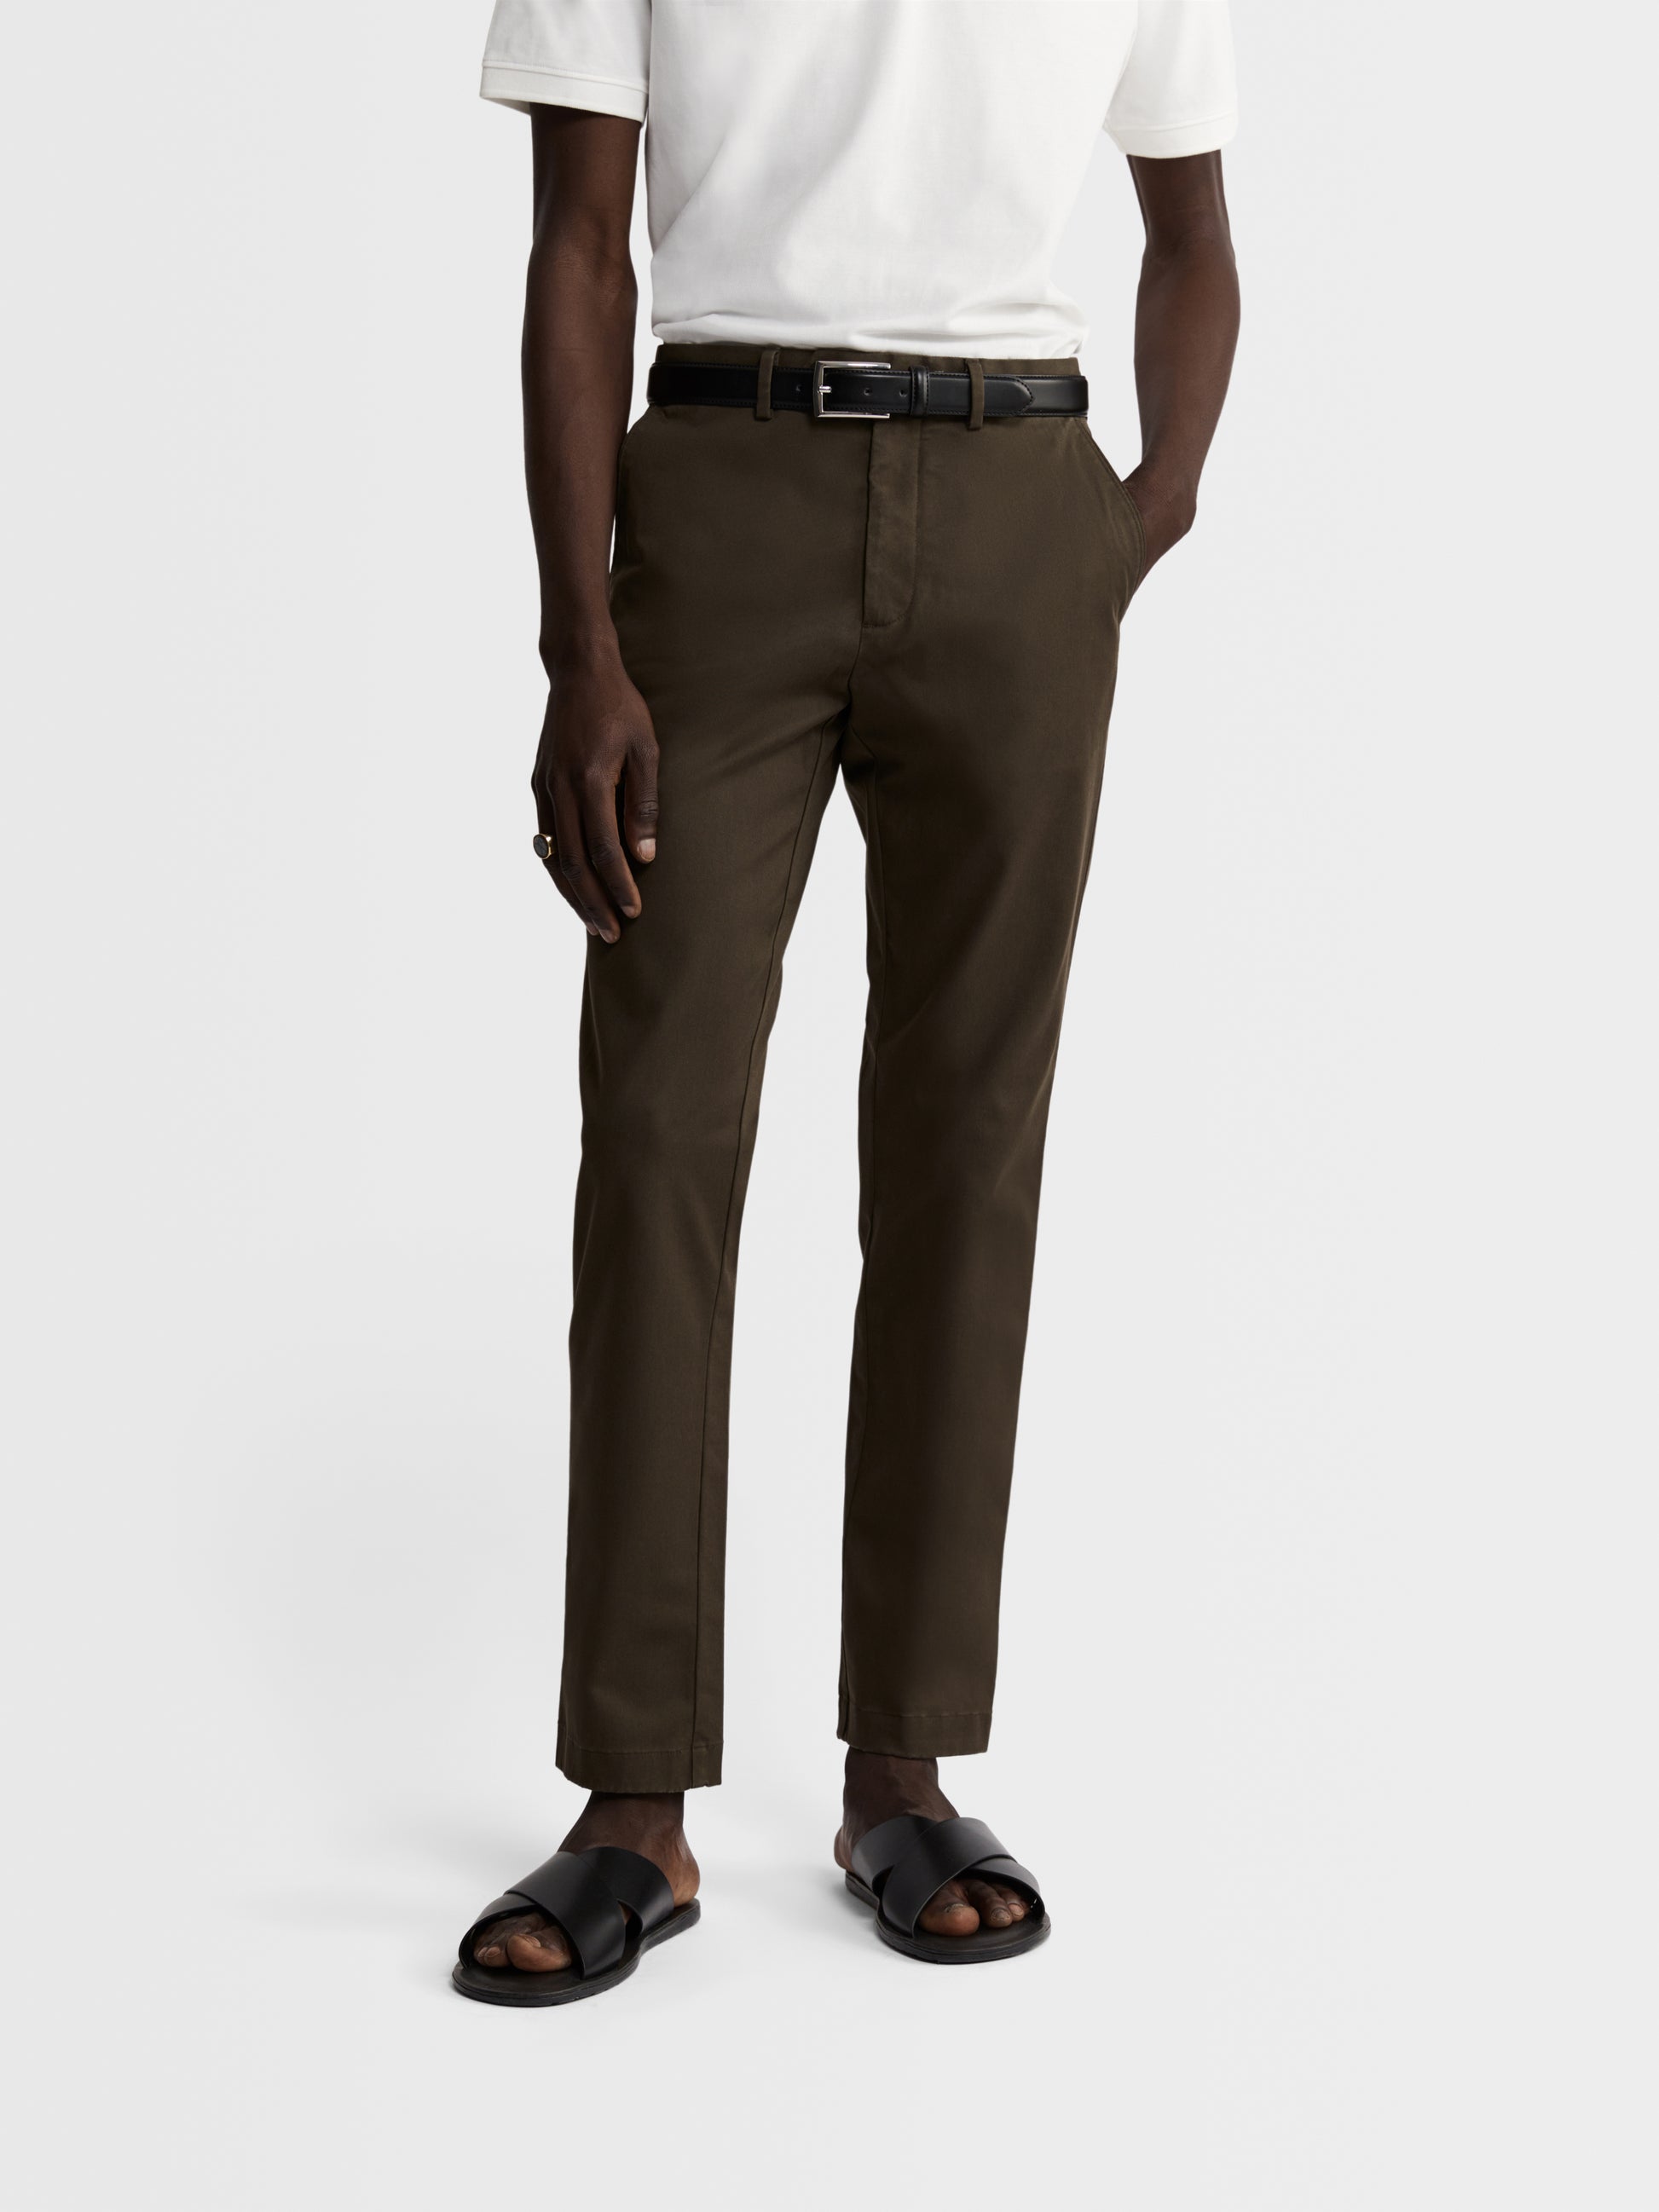 Image 1 of Non Iron Radcliffe Slim Fit Olive Chino